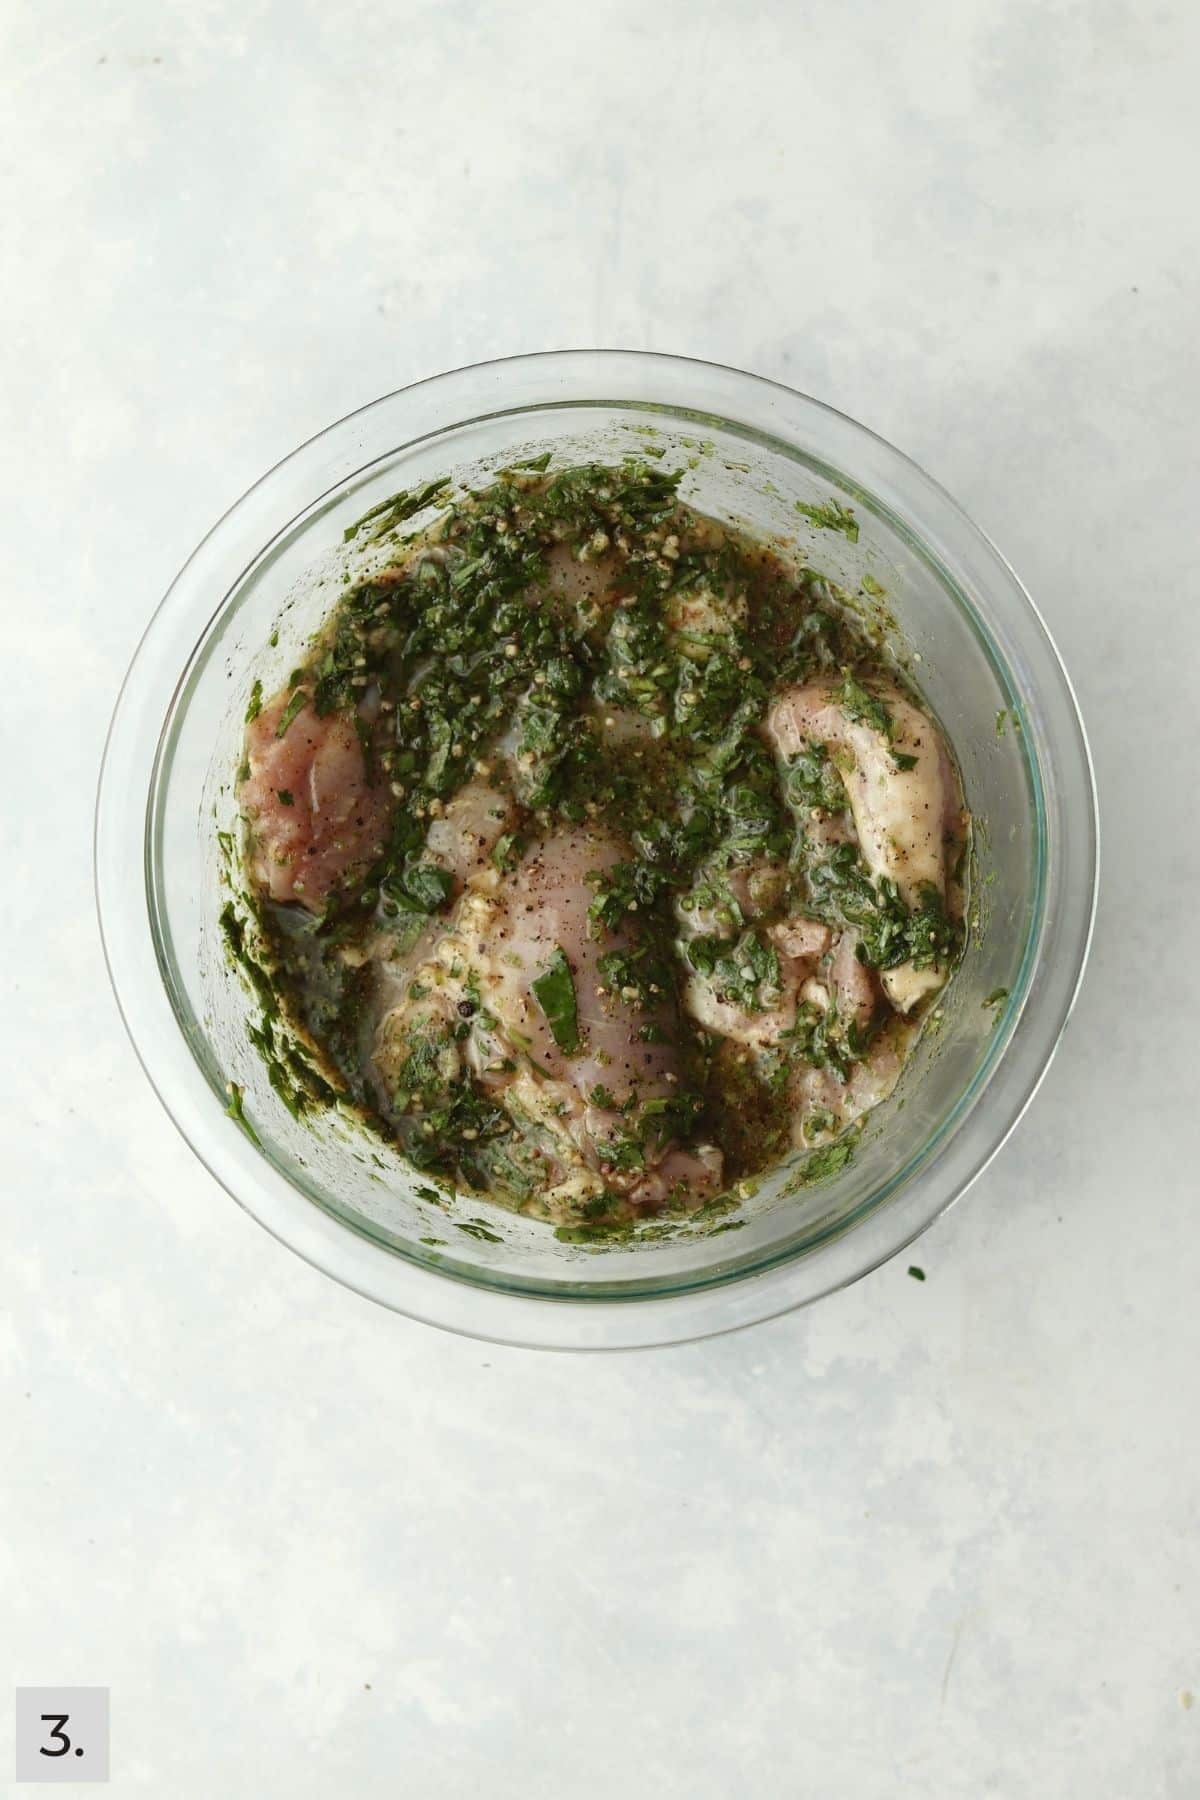 Chicken things in cilantro lime marinade in bowl.